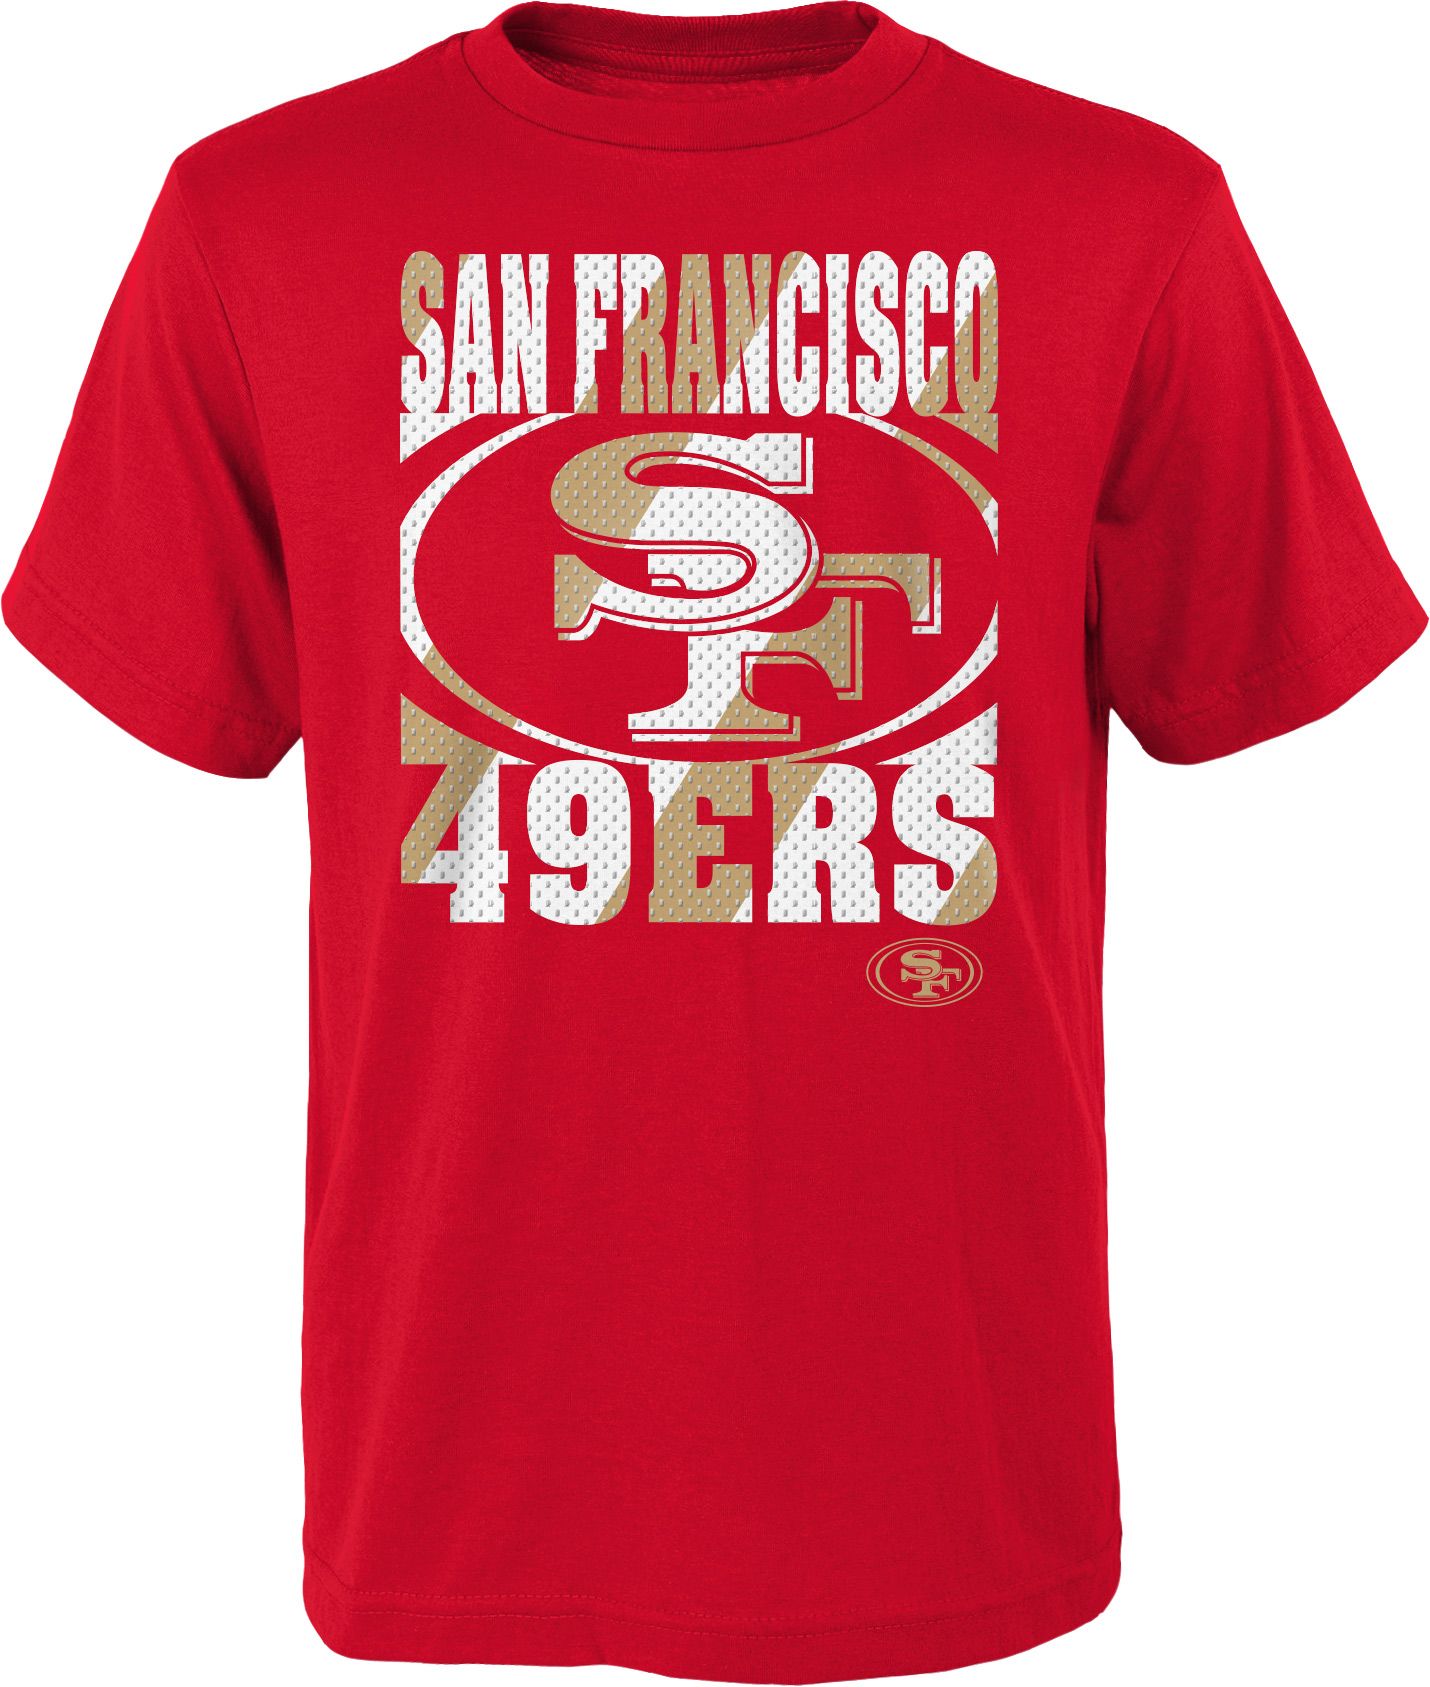 san francisco 49ers outfits